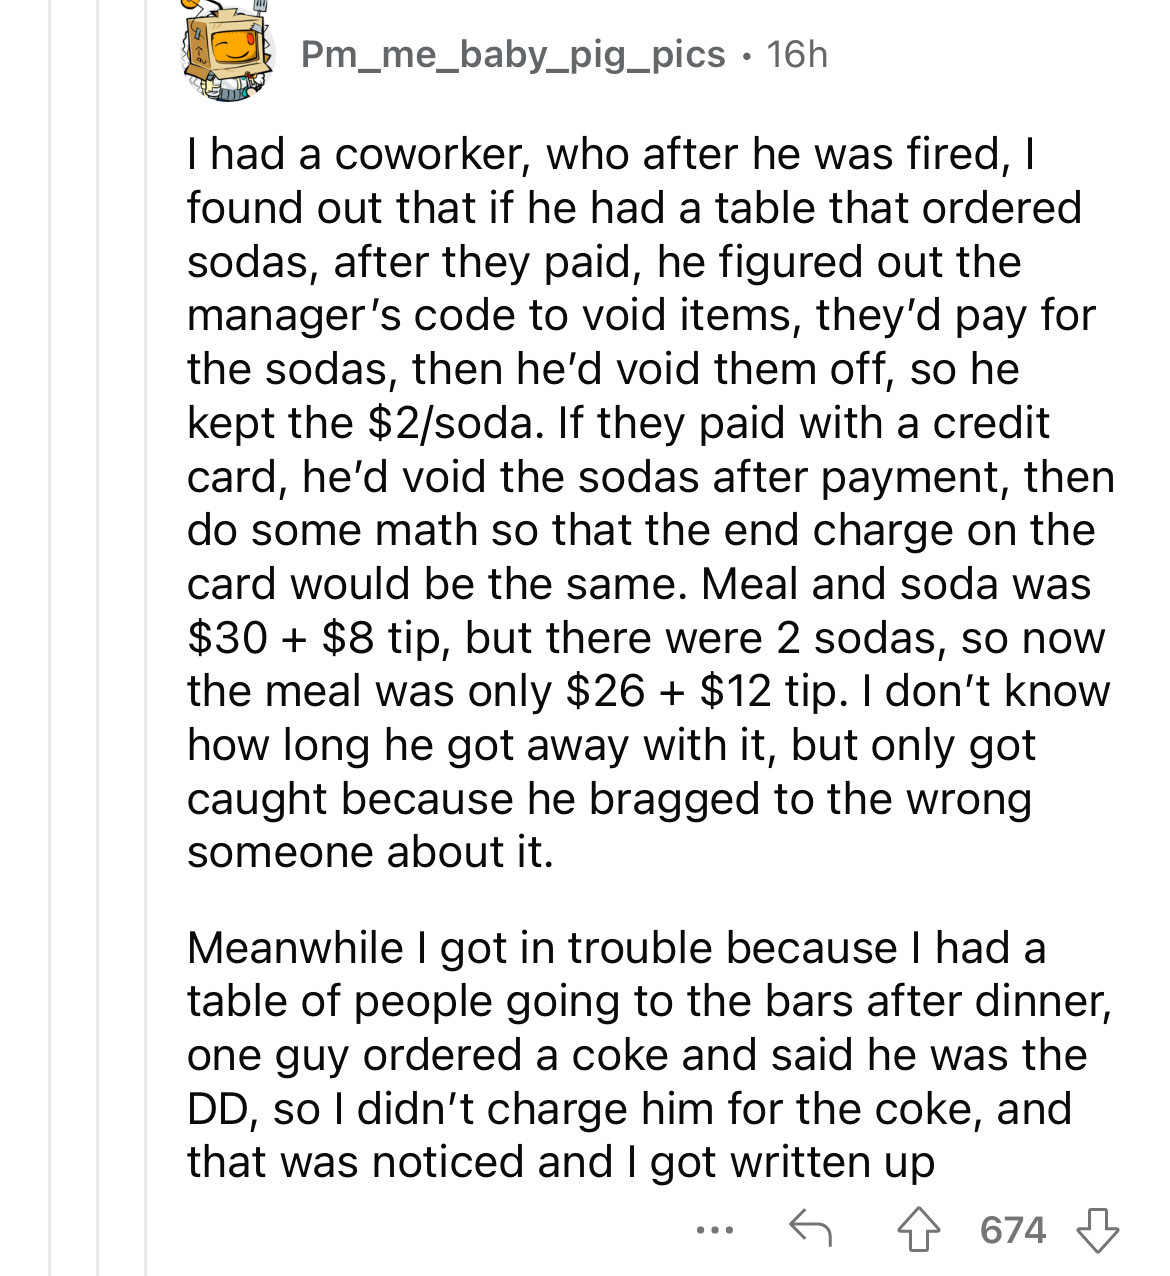 paper - Pm_me_baby_pig_pics 16h. I had a coworker, who after he was fired, I found out that if he had a table that ordered sodas, after they paid, he figured out the manager's code to void items, they'd pay for the sodas, then he'd void them off, so he ke